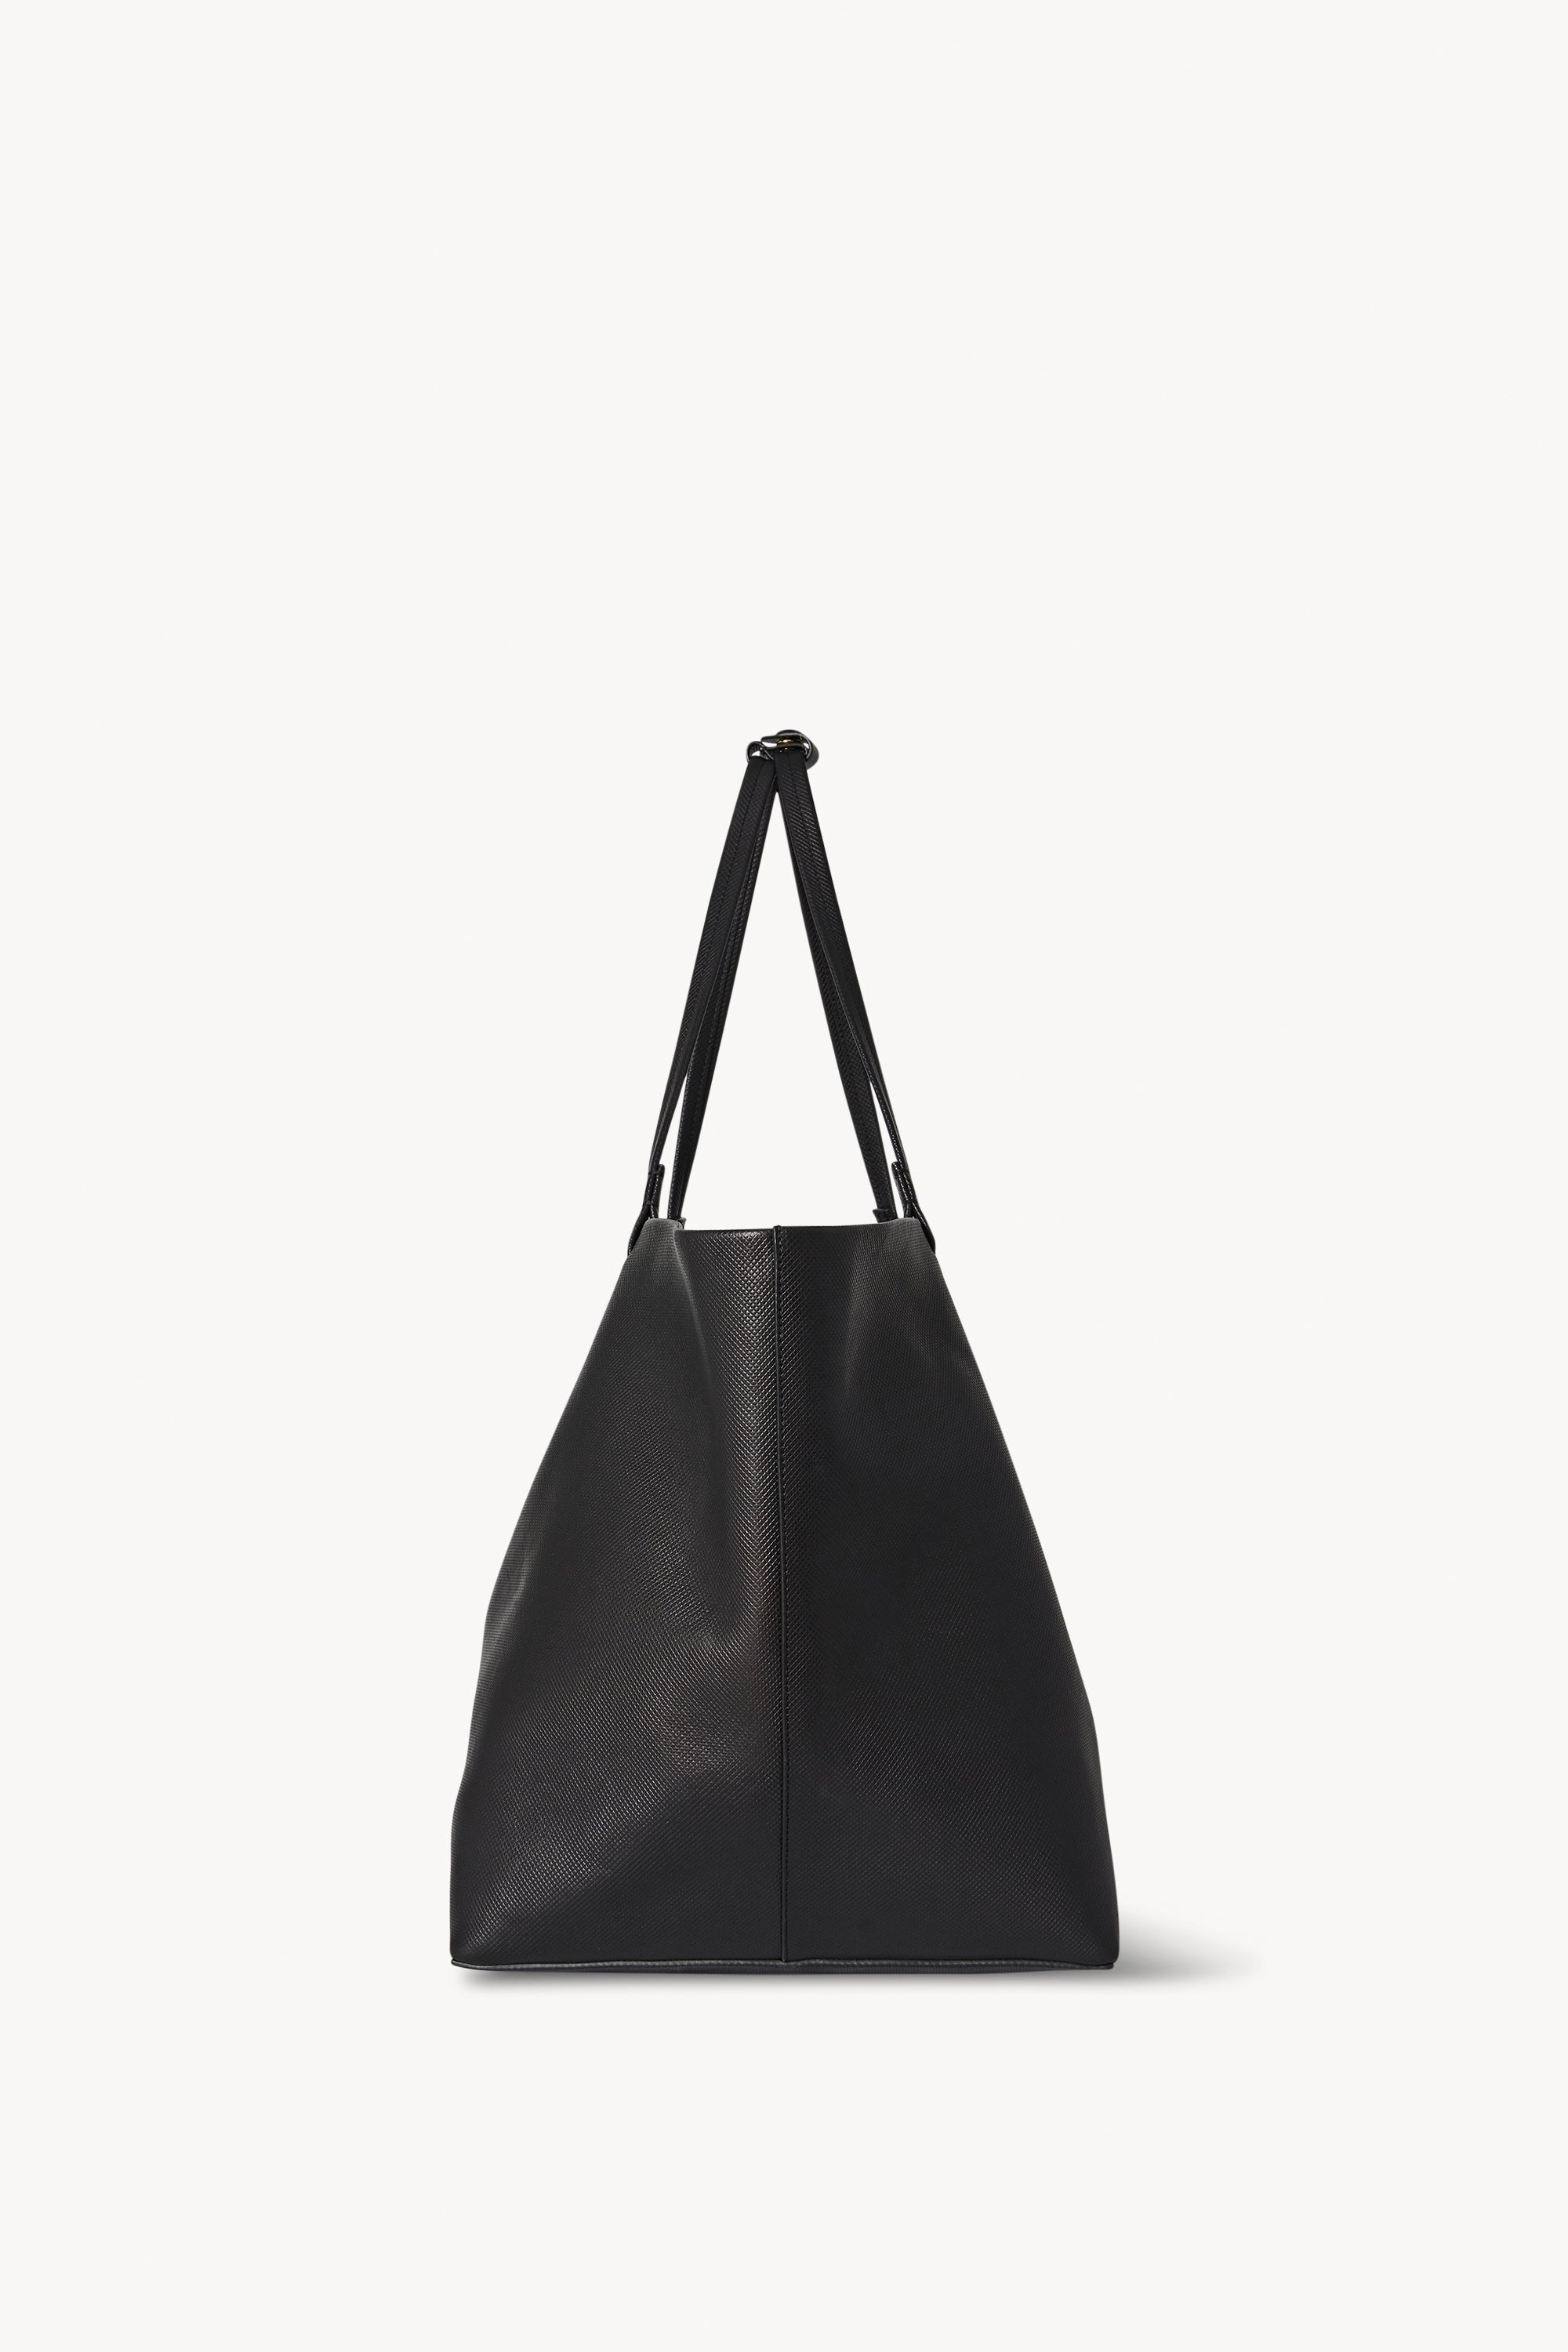 Park Tote Three Bag in Leather - 3